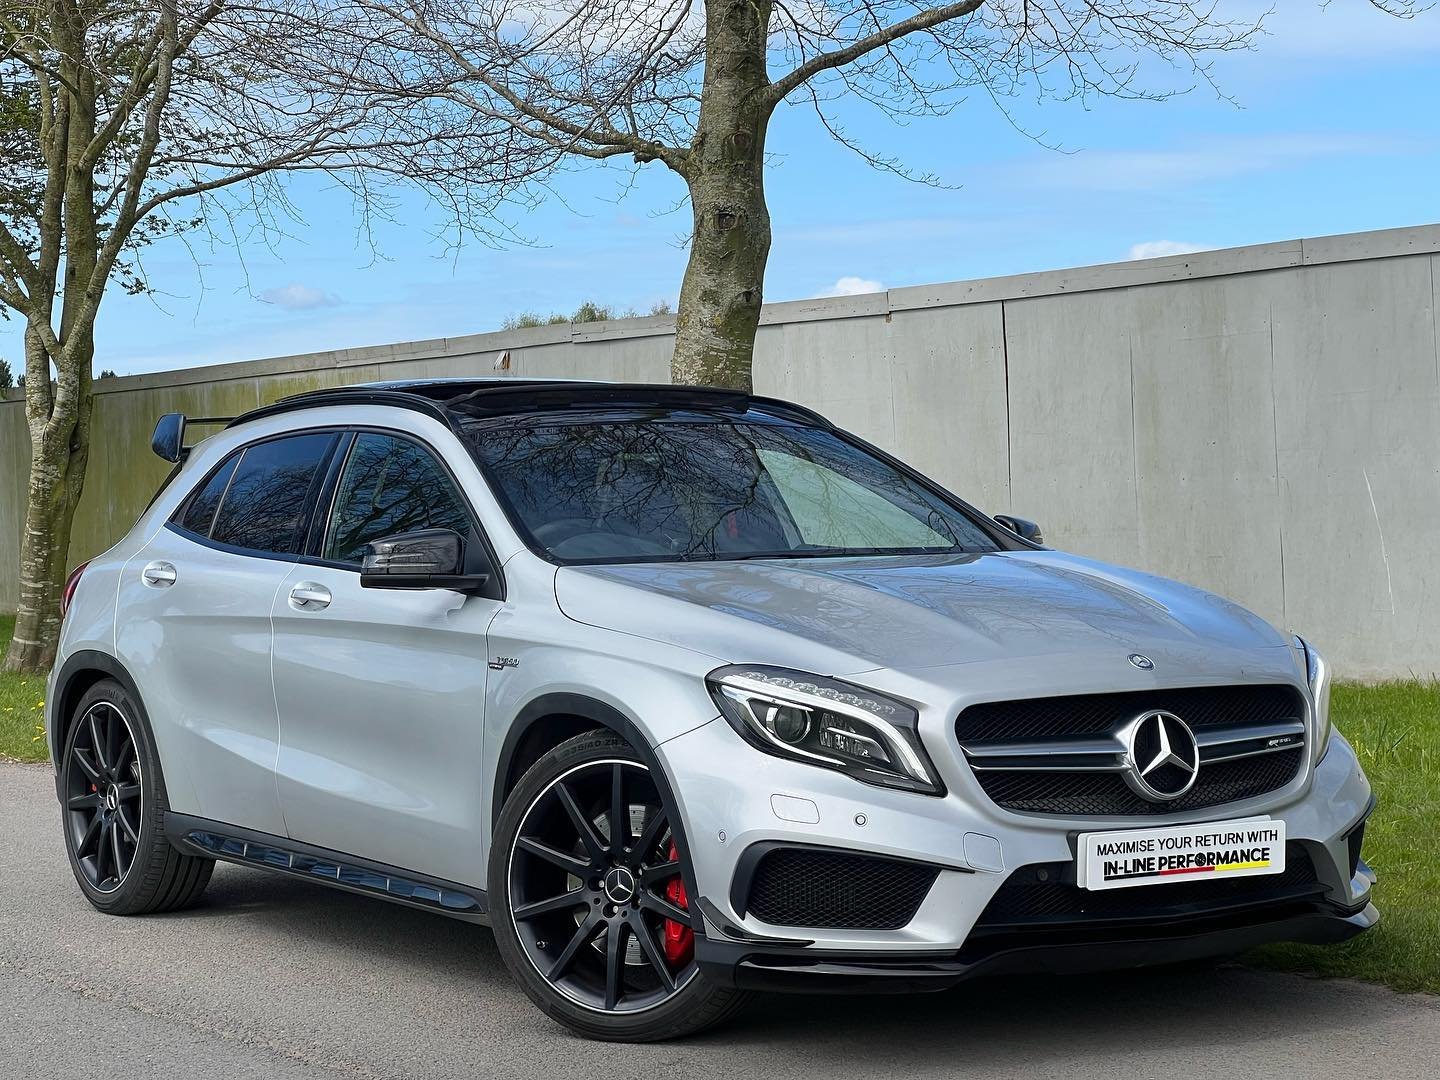 Here At IN-LINE PERFORMANCE We Take Pride And Joy Into Supplying You With The Best Of Performance Engineering . We Are Proud To Present To You This 2015 Mercedes Benz GLA 45 Finished In A Desirable Polar  Silver Metallic  With Black Exclusive AMG Lea